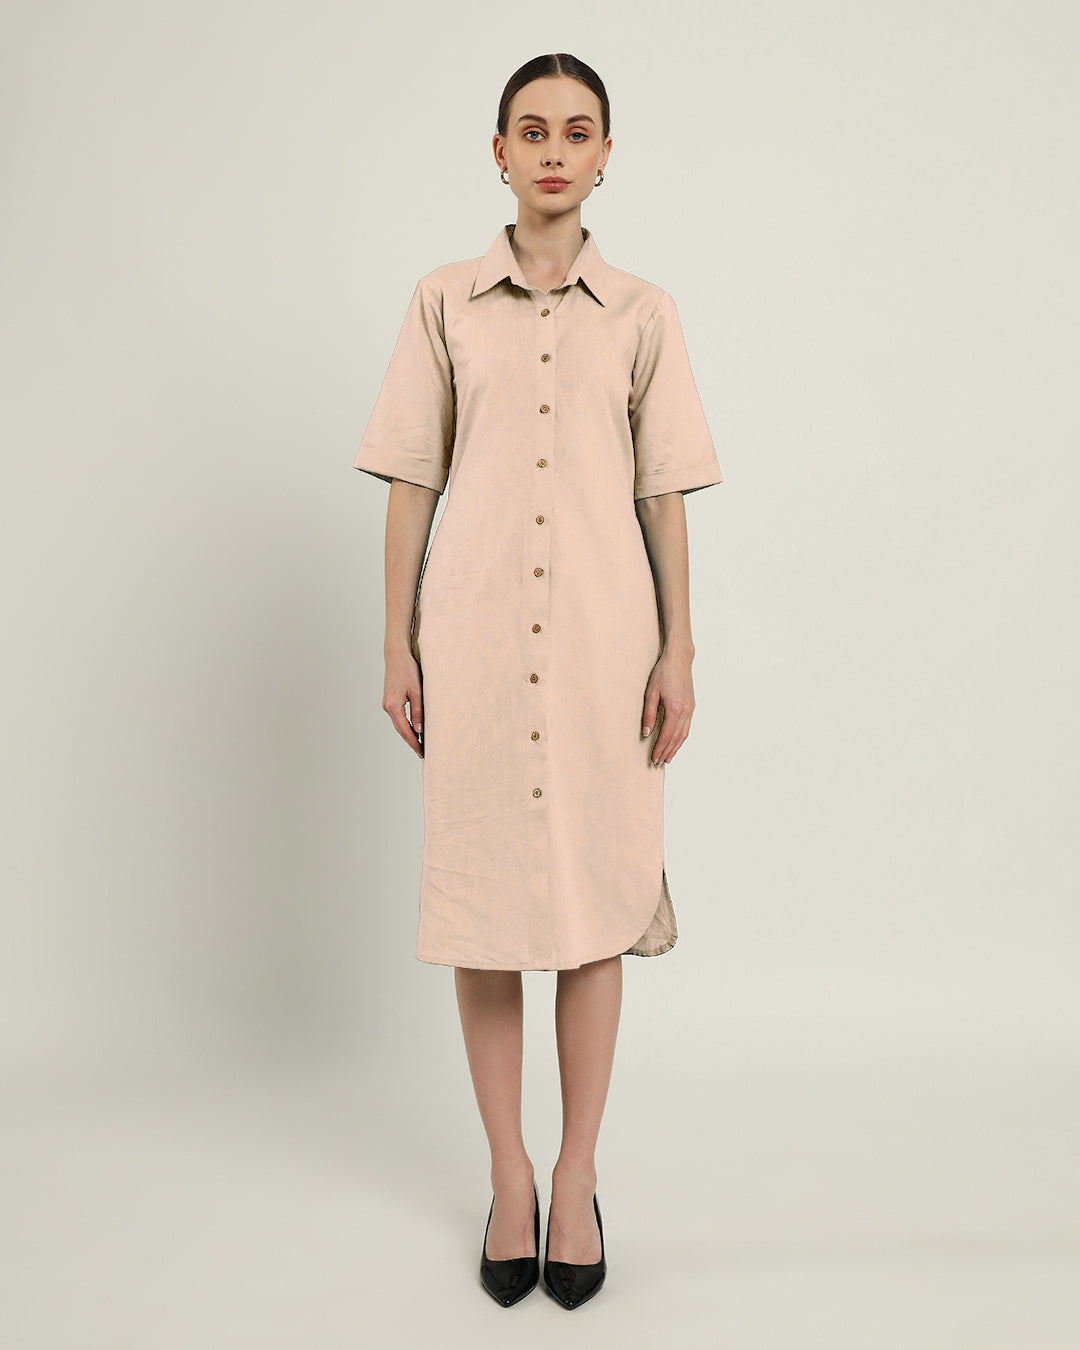 The Tampa Daisy Bisque Linen Dress